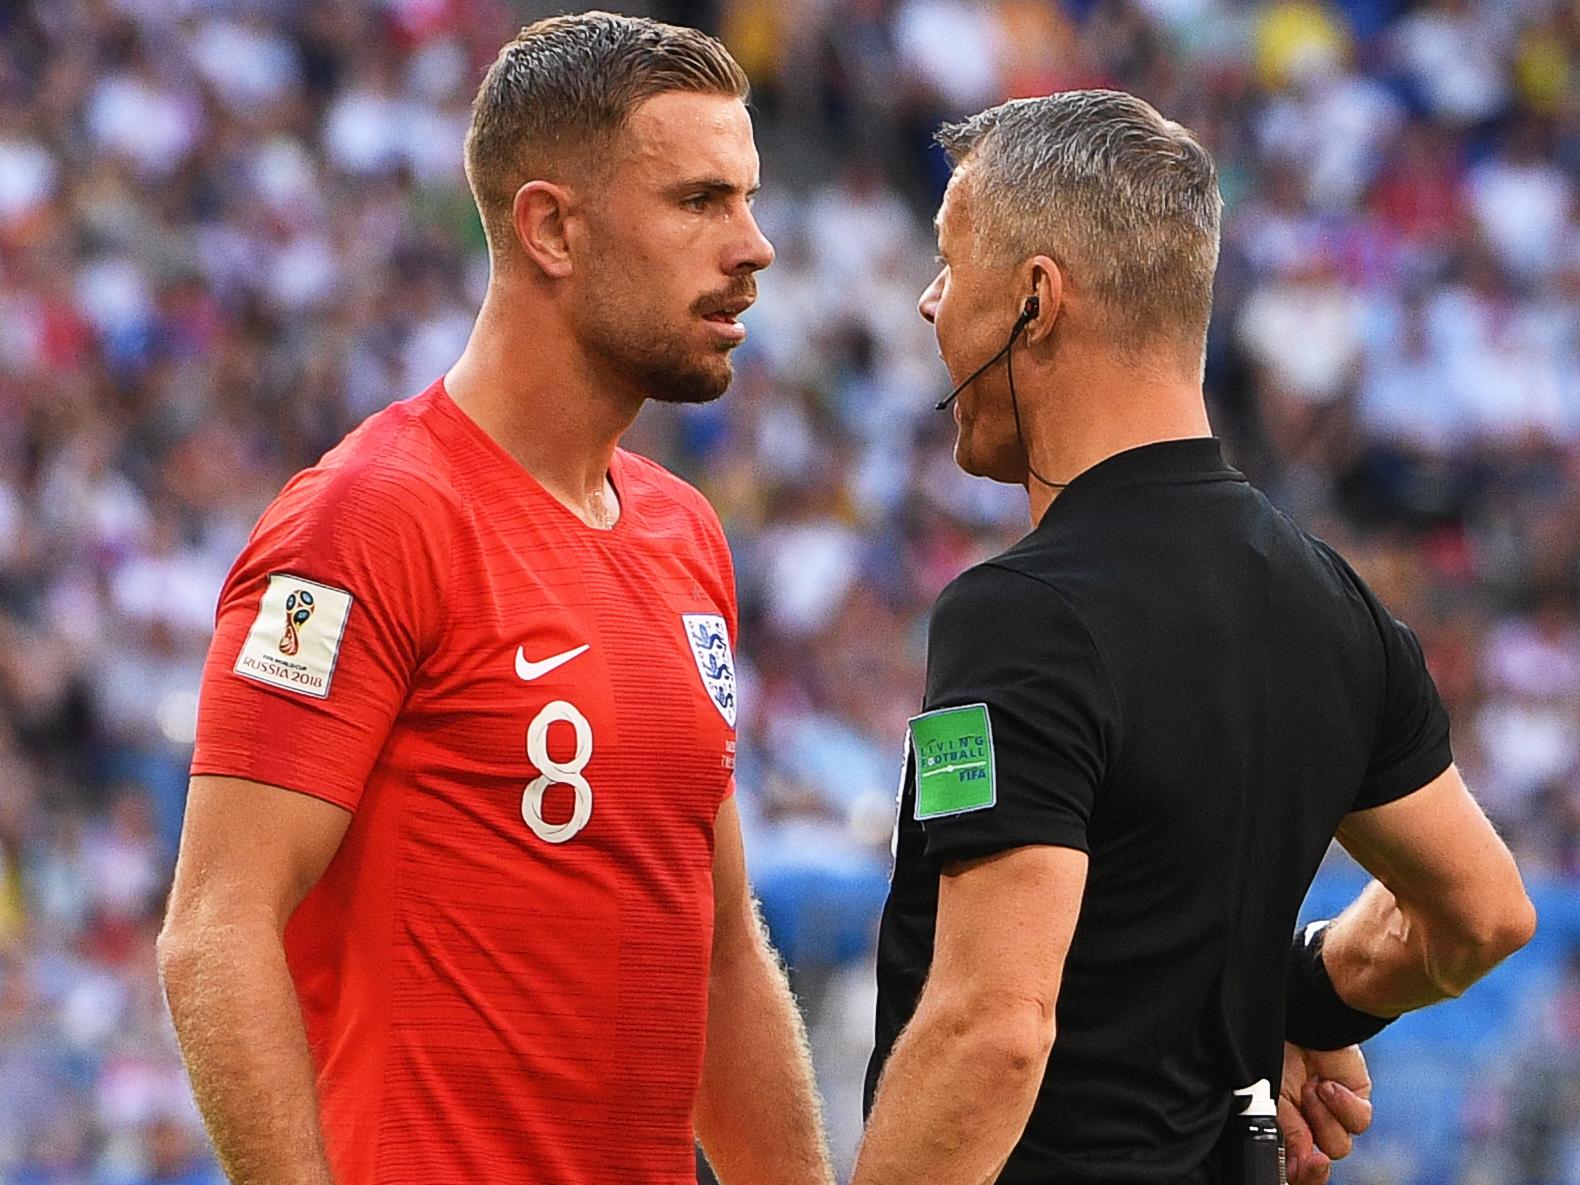 Jordan Henderson is given a telling off by referee Bjorn Kuipers